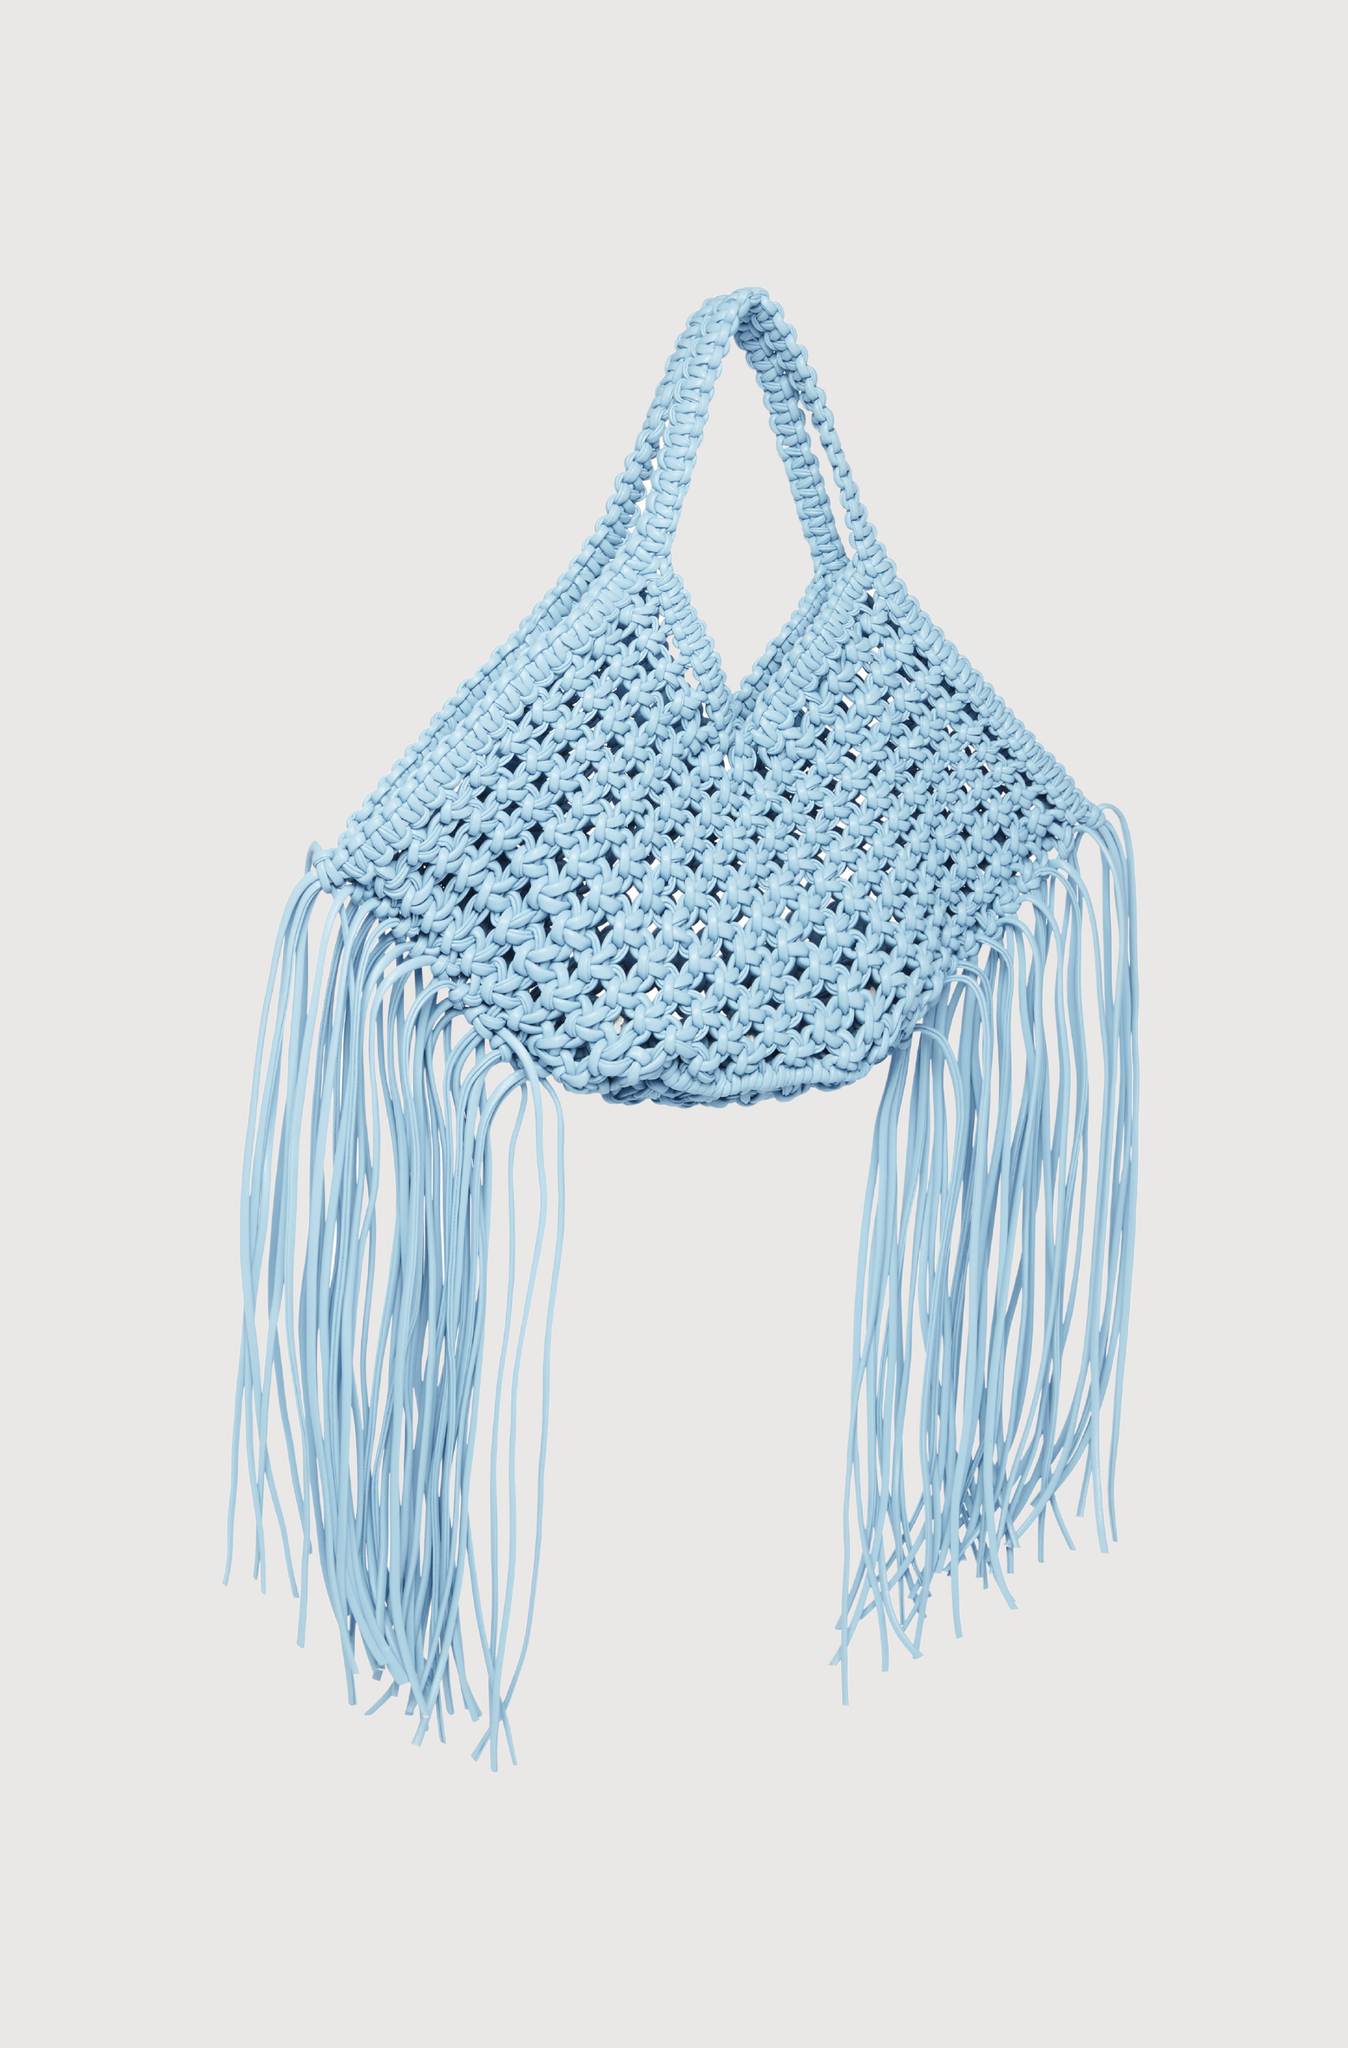 SMALL WOVEN BASKET - BABY BLUE